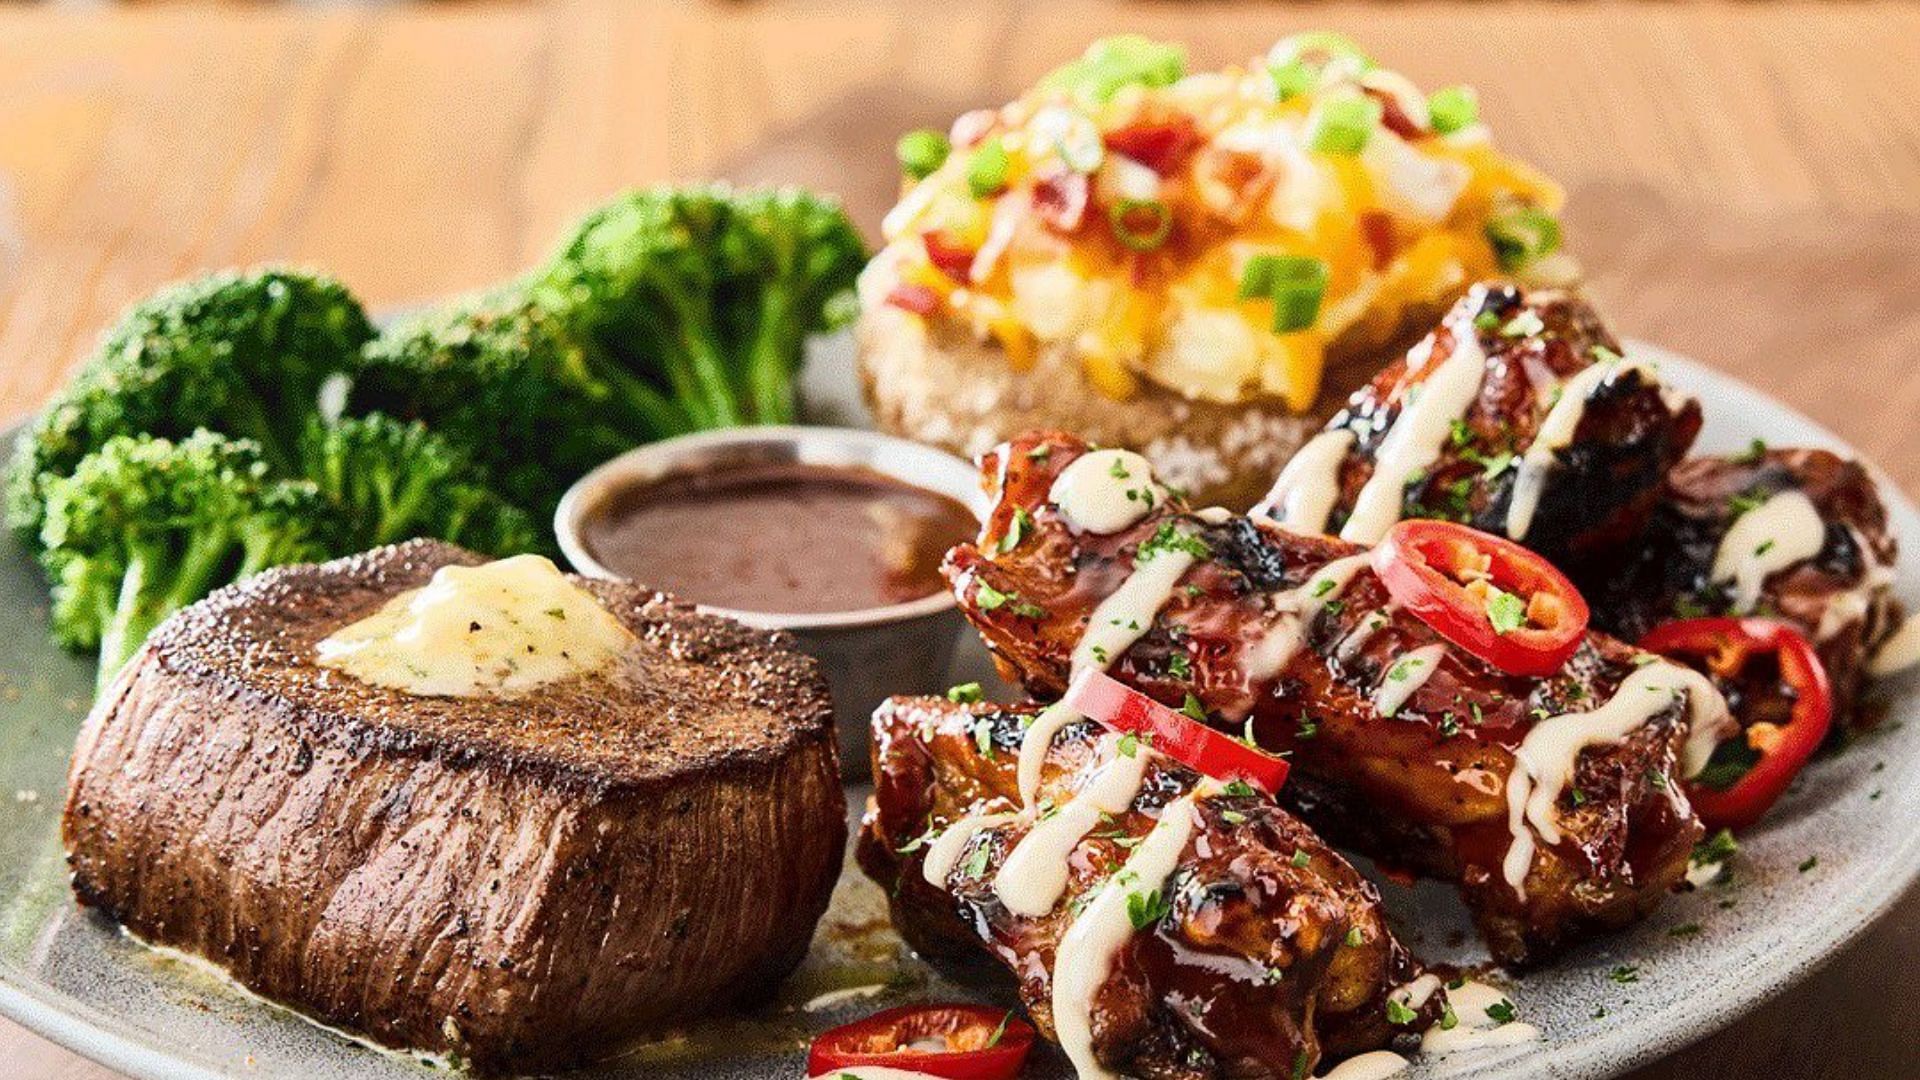 The Sirloin and Aussie Chook Ribs (Image via Outback Steakhouse)